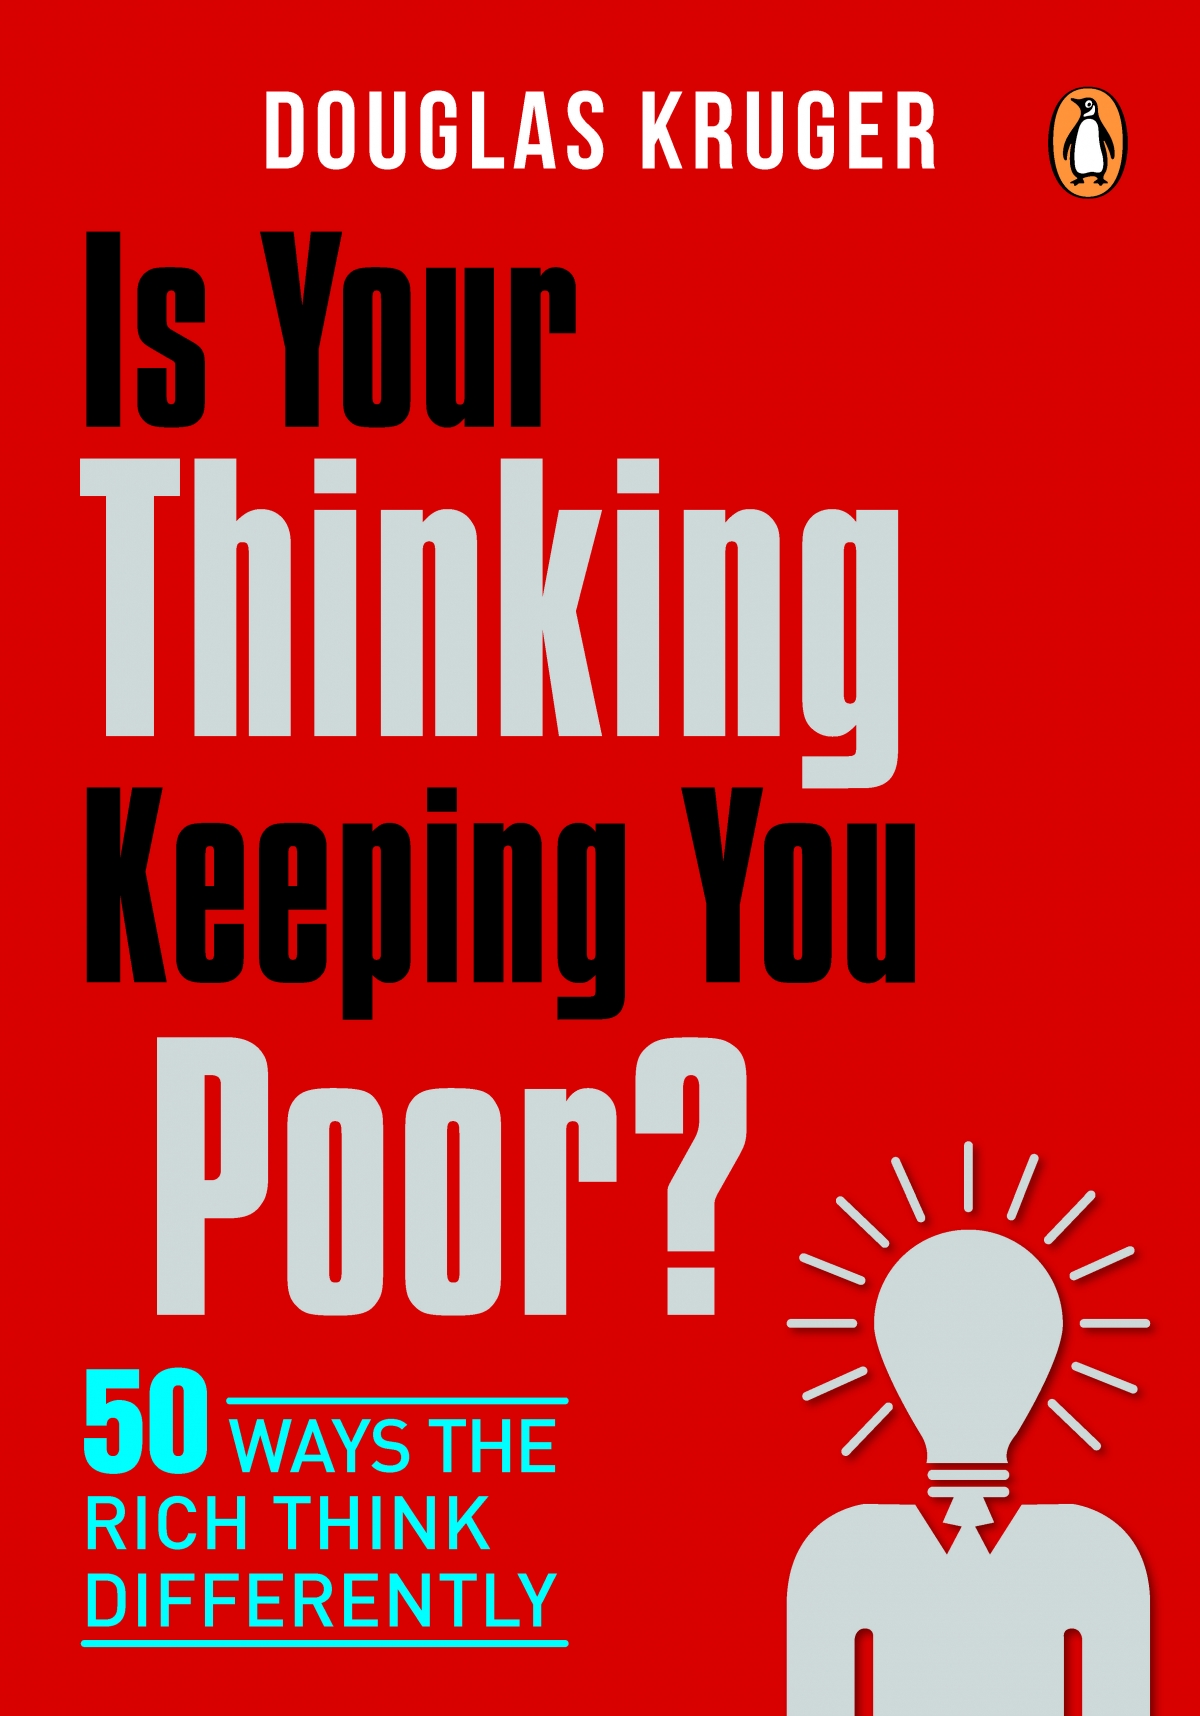 Is Your Thinking Keeping You Poor?